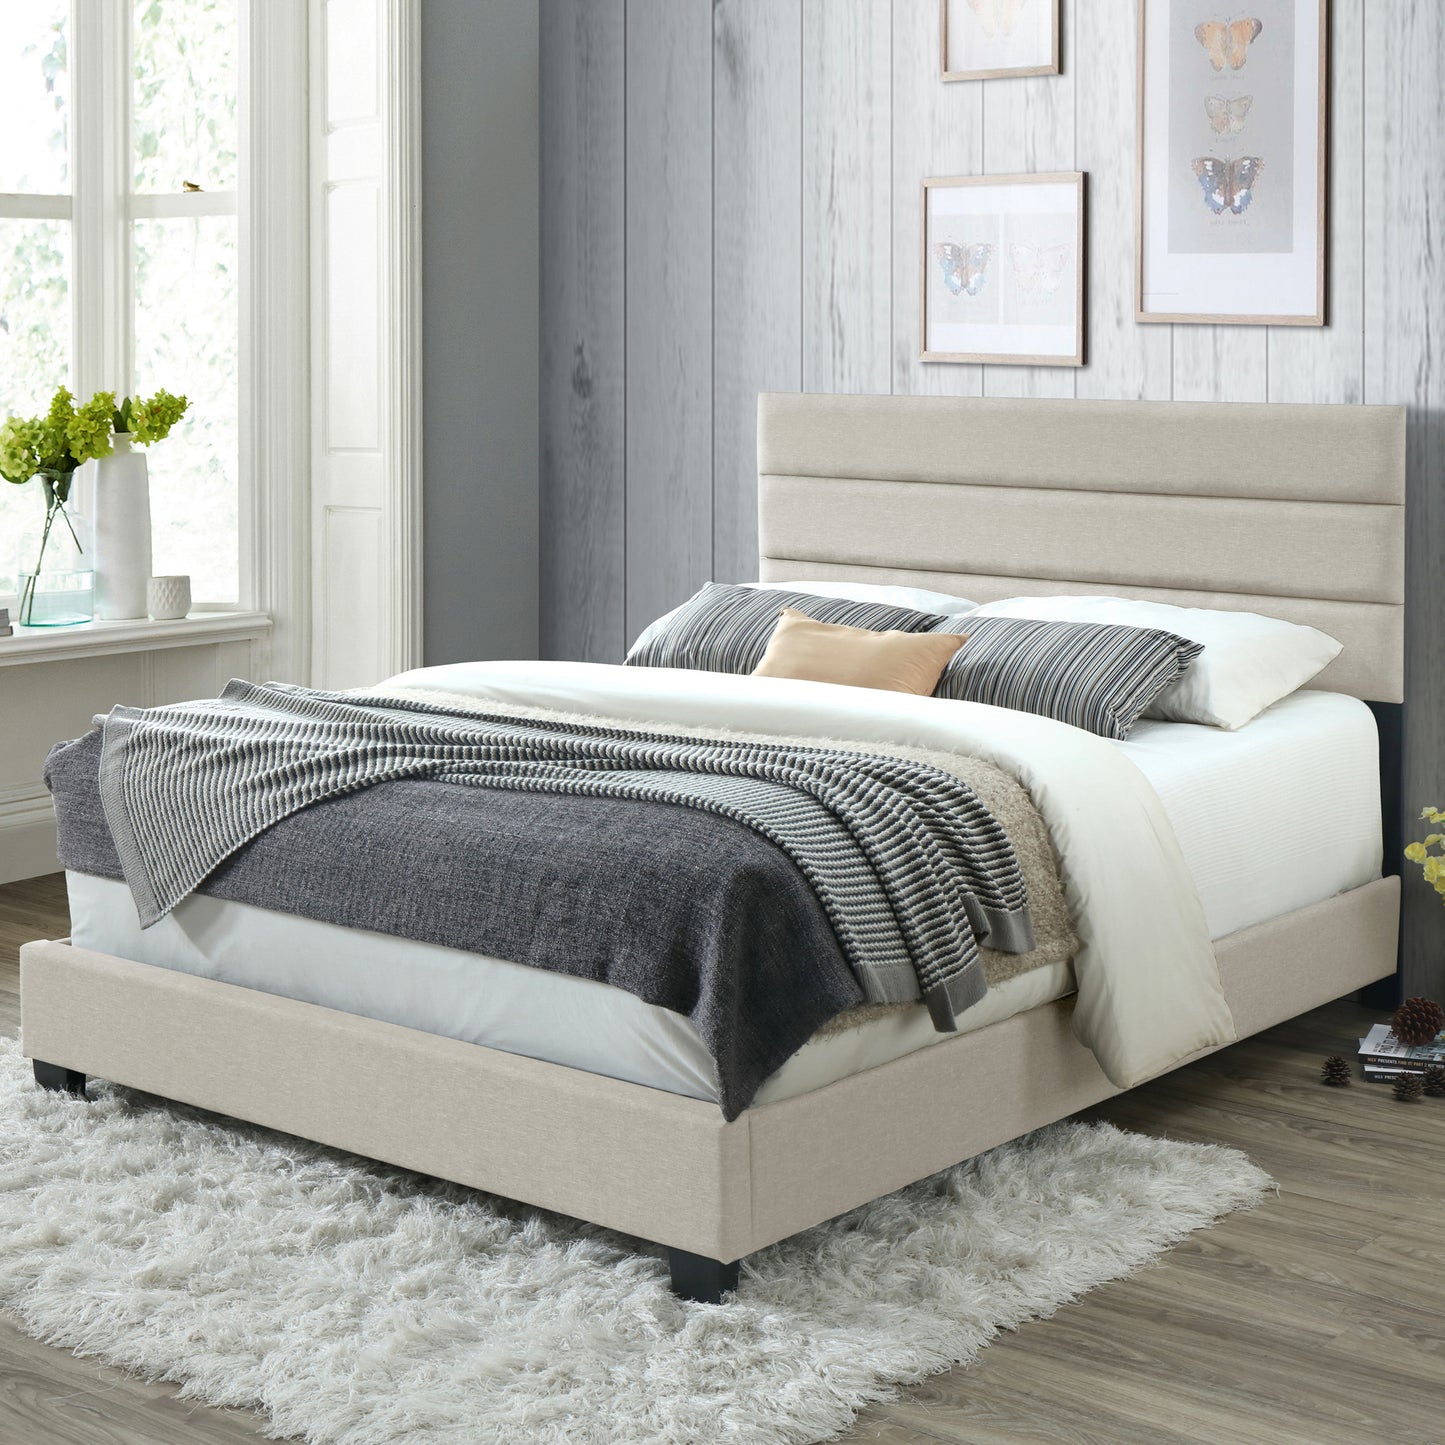 Aris Beige Fabric Queen Bed with Line Stitching Tufting